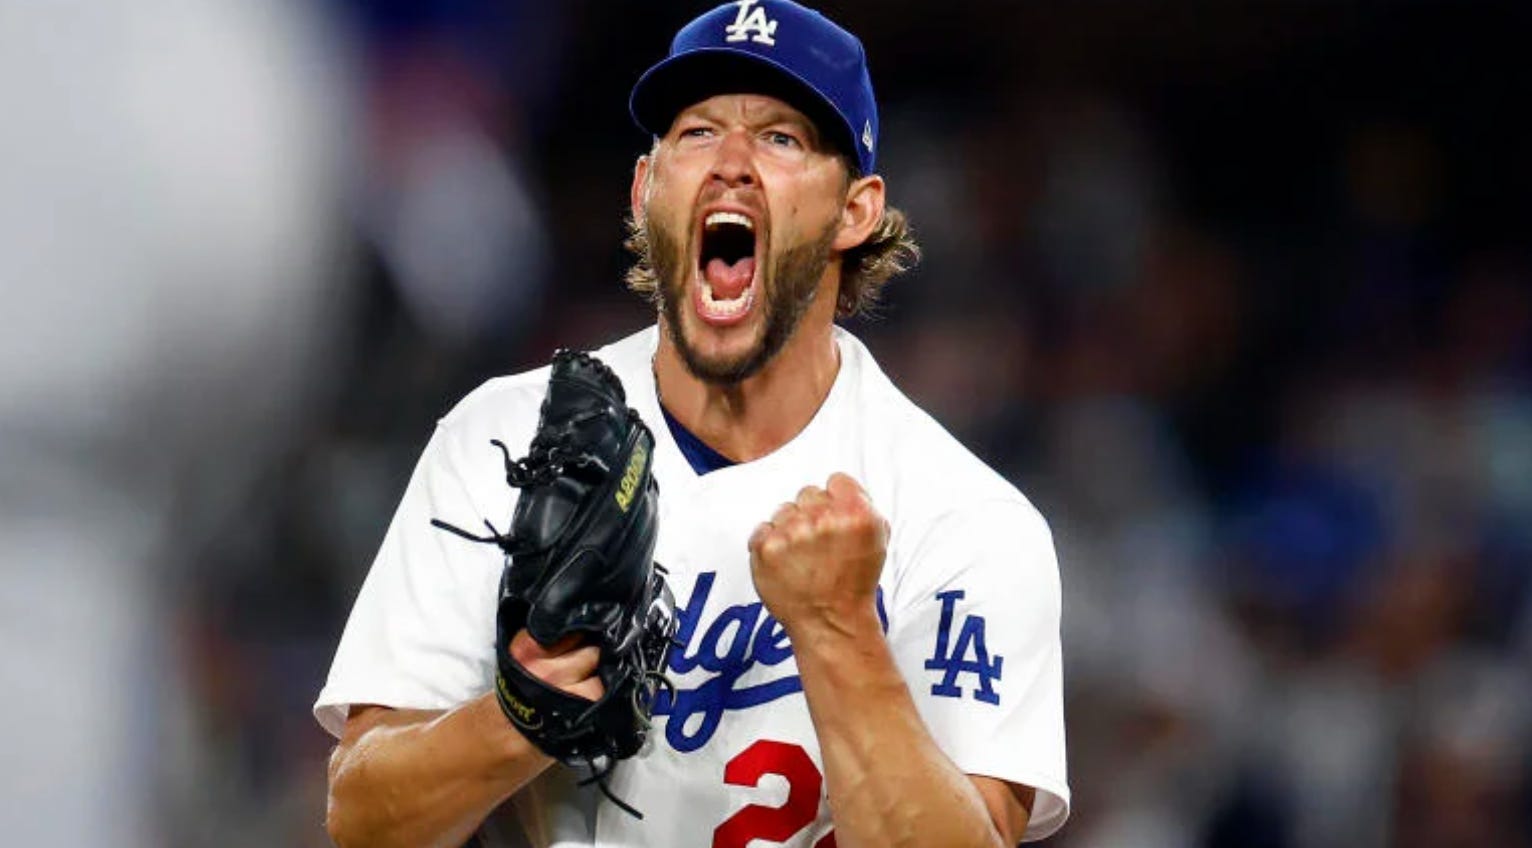 Clayton Kershaw Game Used Home Jersey - 7th Win 2019 - 6/8/19